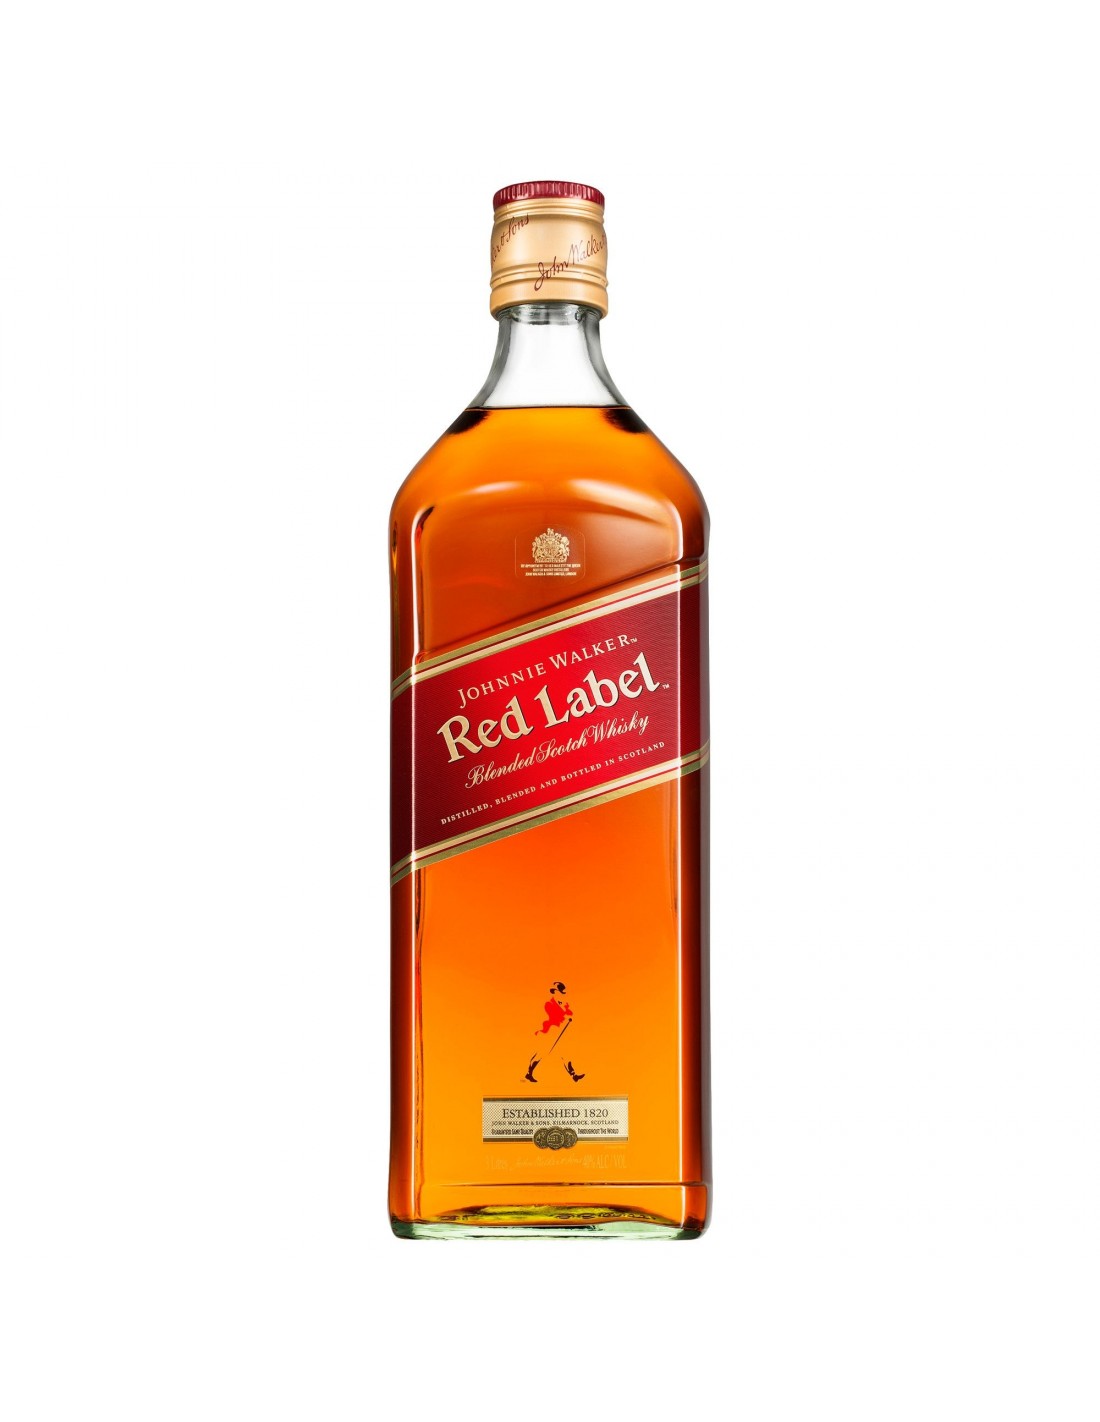 Whisky Johnnie Walker Red Label 3L, 40% alc., Scotia alcooldiscount.ro